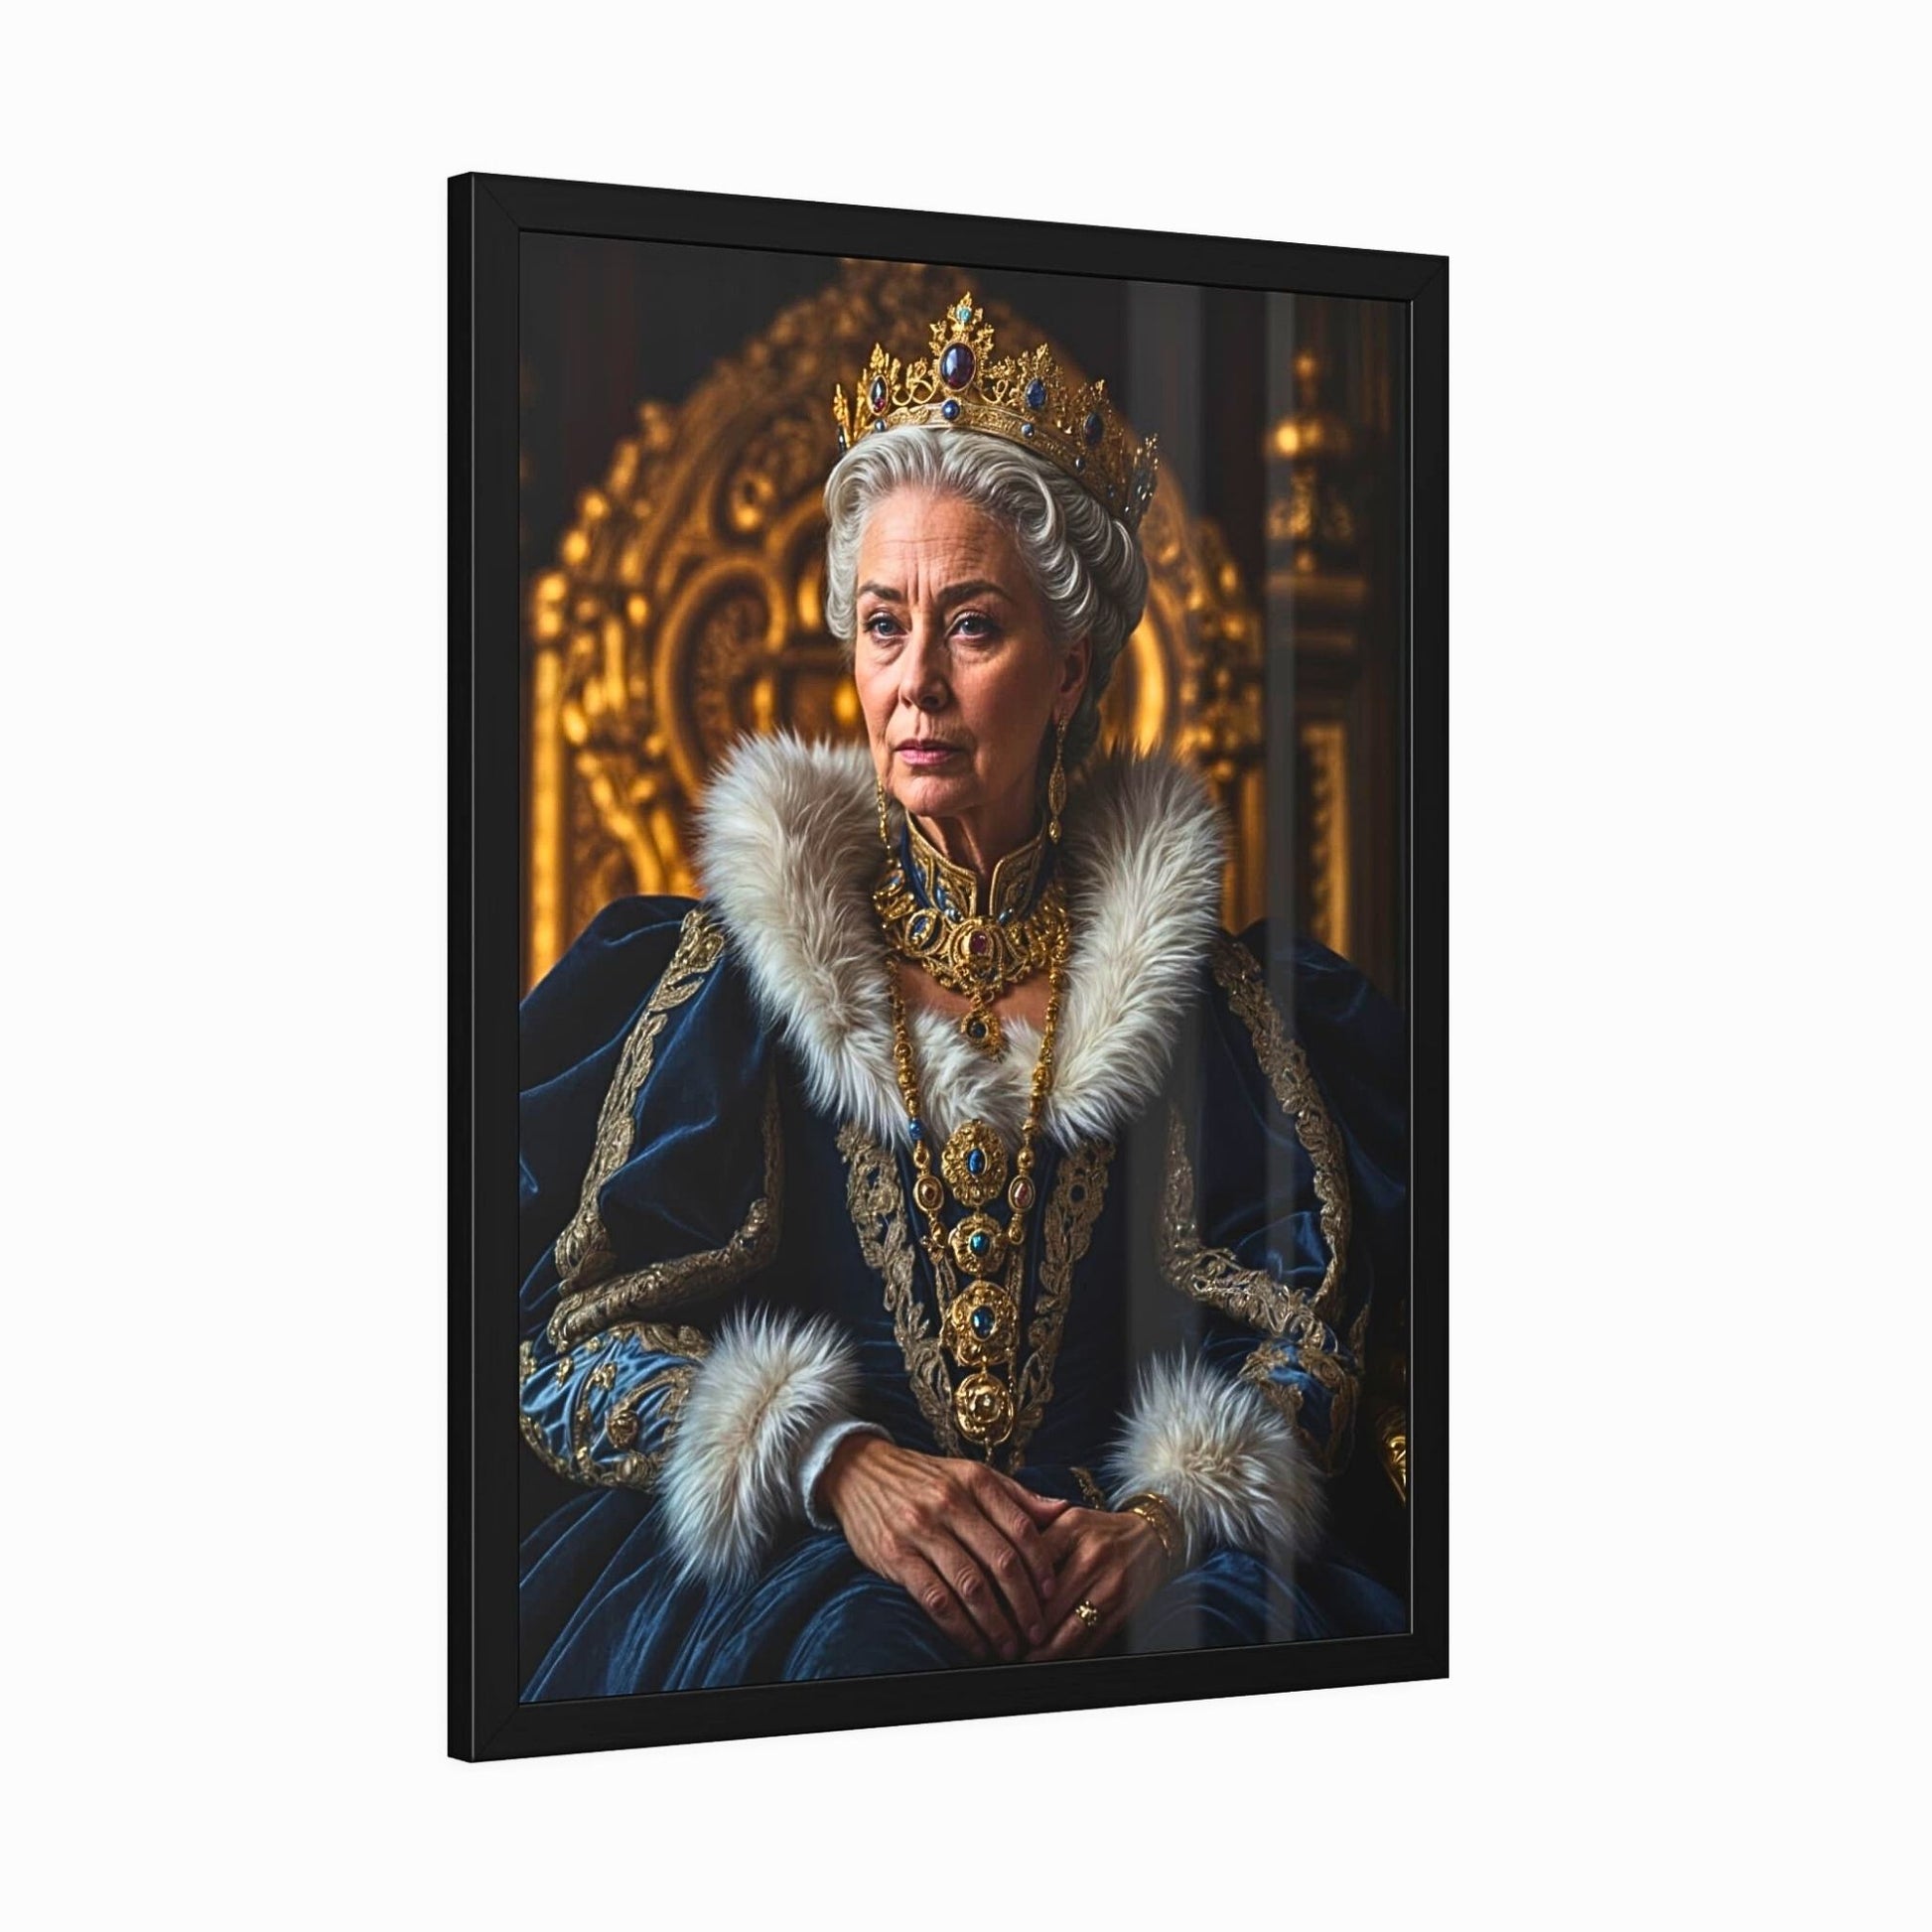 Capture her essence in a custom Renaissance-style portrait, meticulously handcrafted from her photograph. This unique masterpiece transforms her into a majestic figure, perfect for commemorating birthdays or special occasions with a touch of historical elegance. Ideal for those who appreciate bespoke art and seek a meaningful gift that celebrates her grace and personality in a timeless manner.